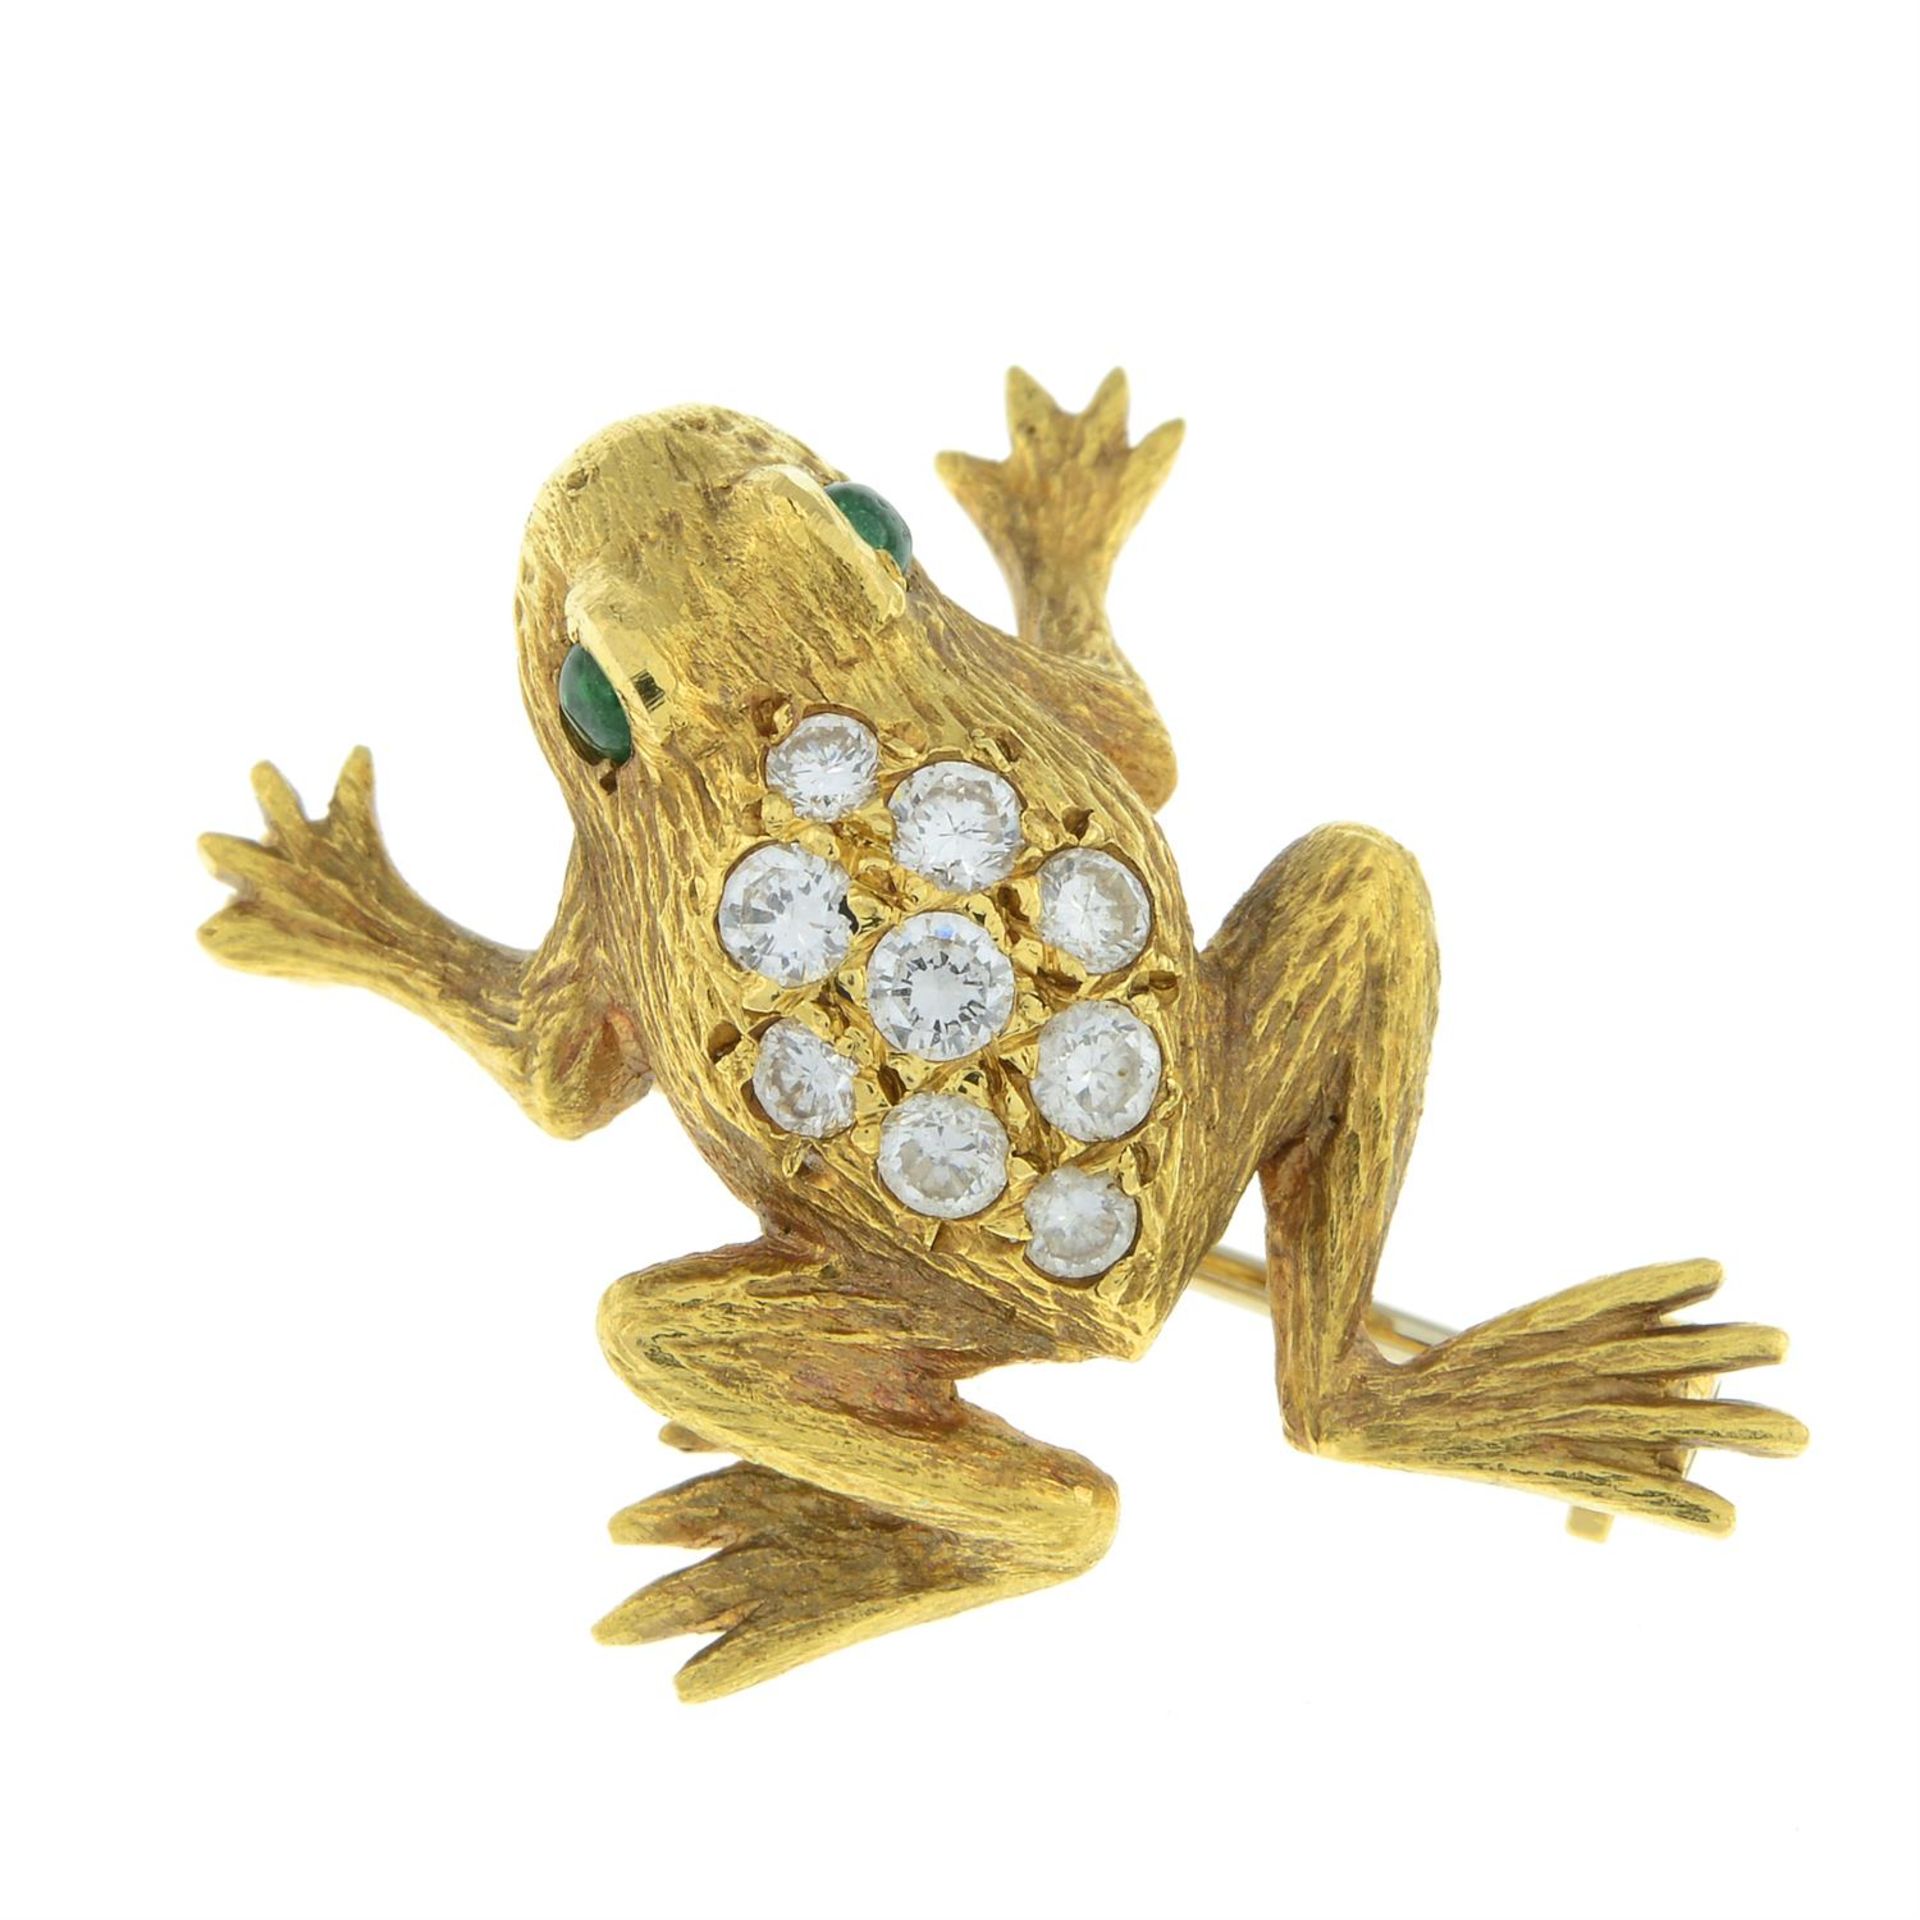 18ct gold diamond frog brooch, by E. Wolfe & Co. - Image 2 of 5